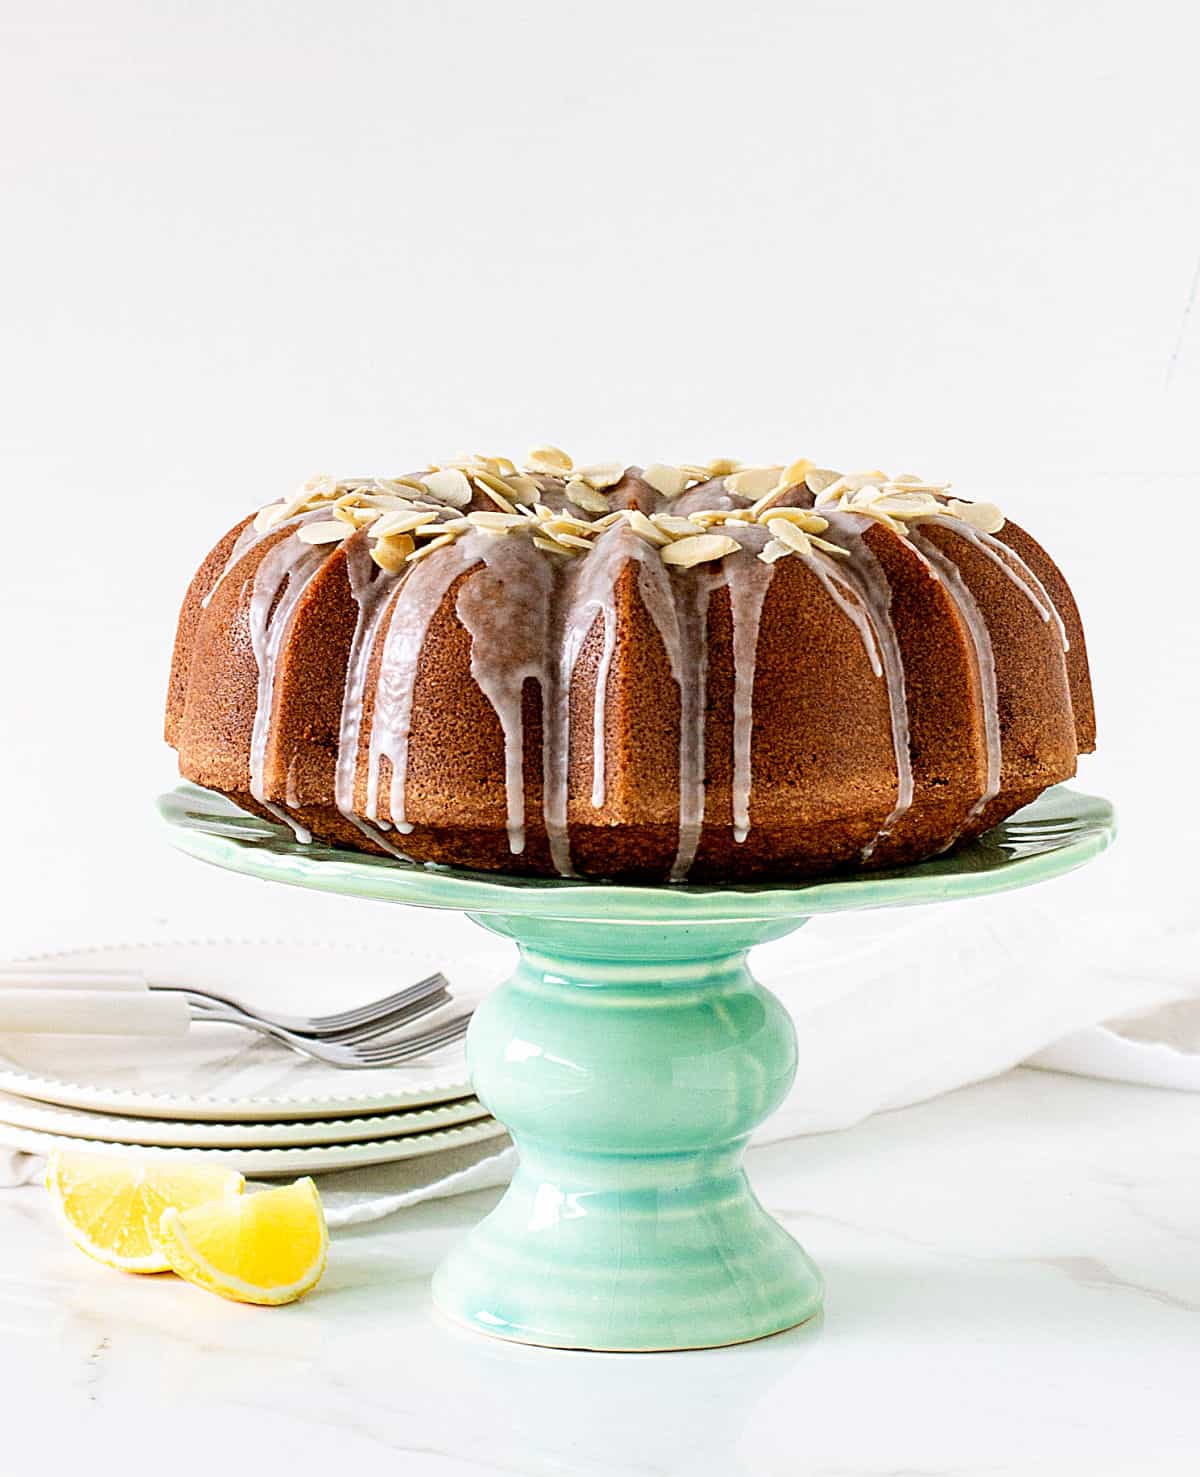 Front view of whole almond topped bundt cake on green cake stand, white plates and background, lemon wedges